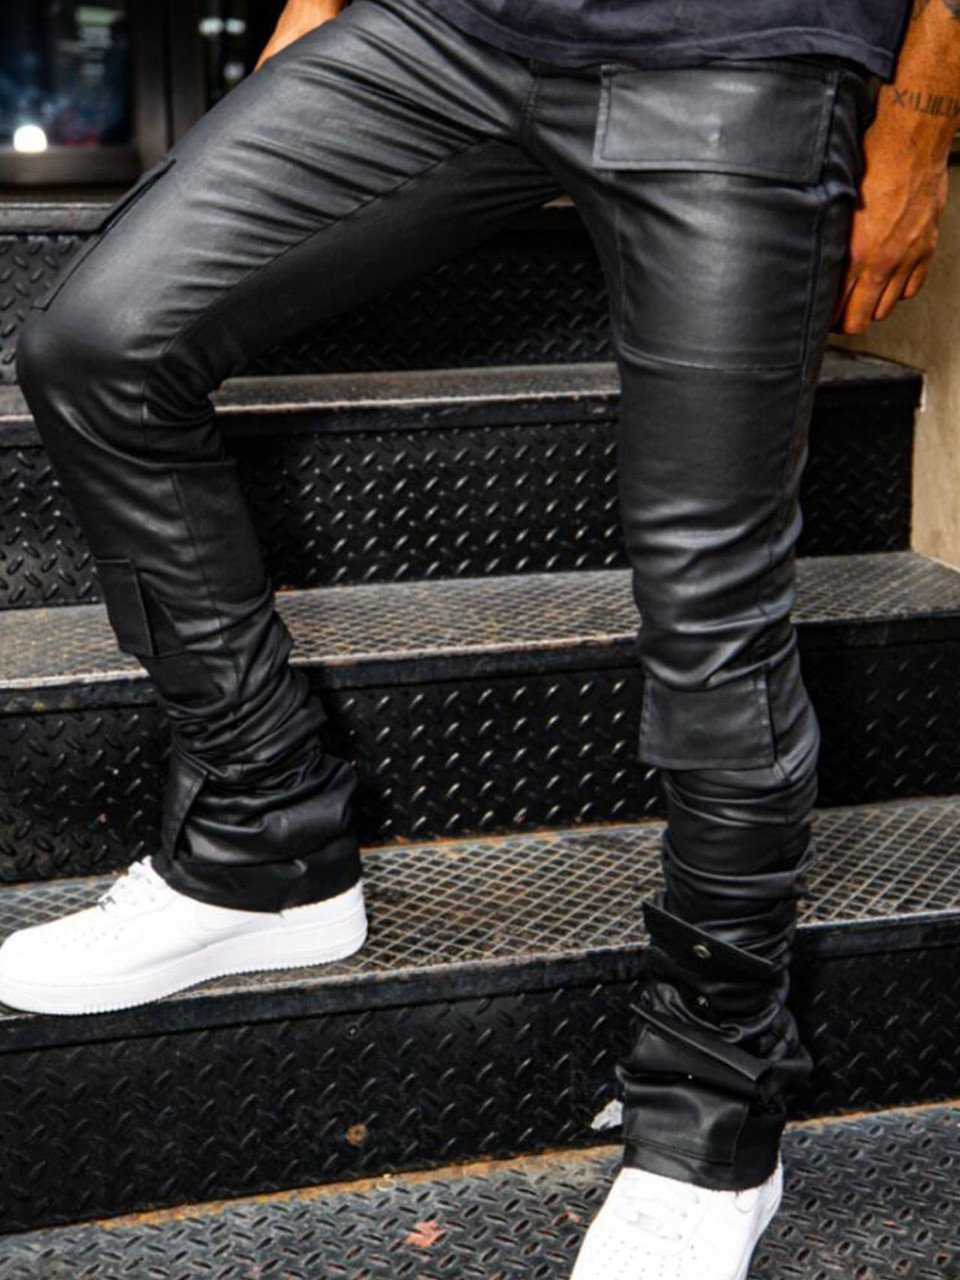 Button Fly Skinny Jeans - Black Waxed